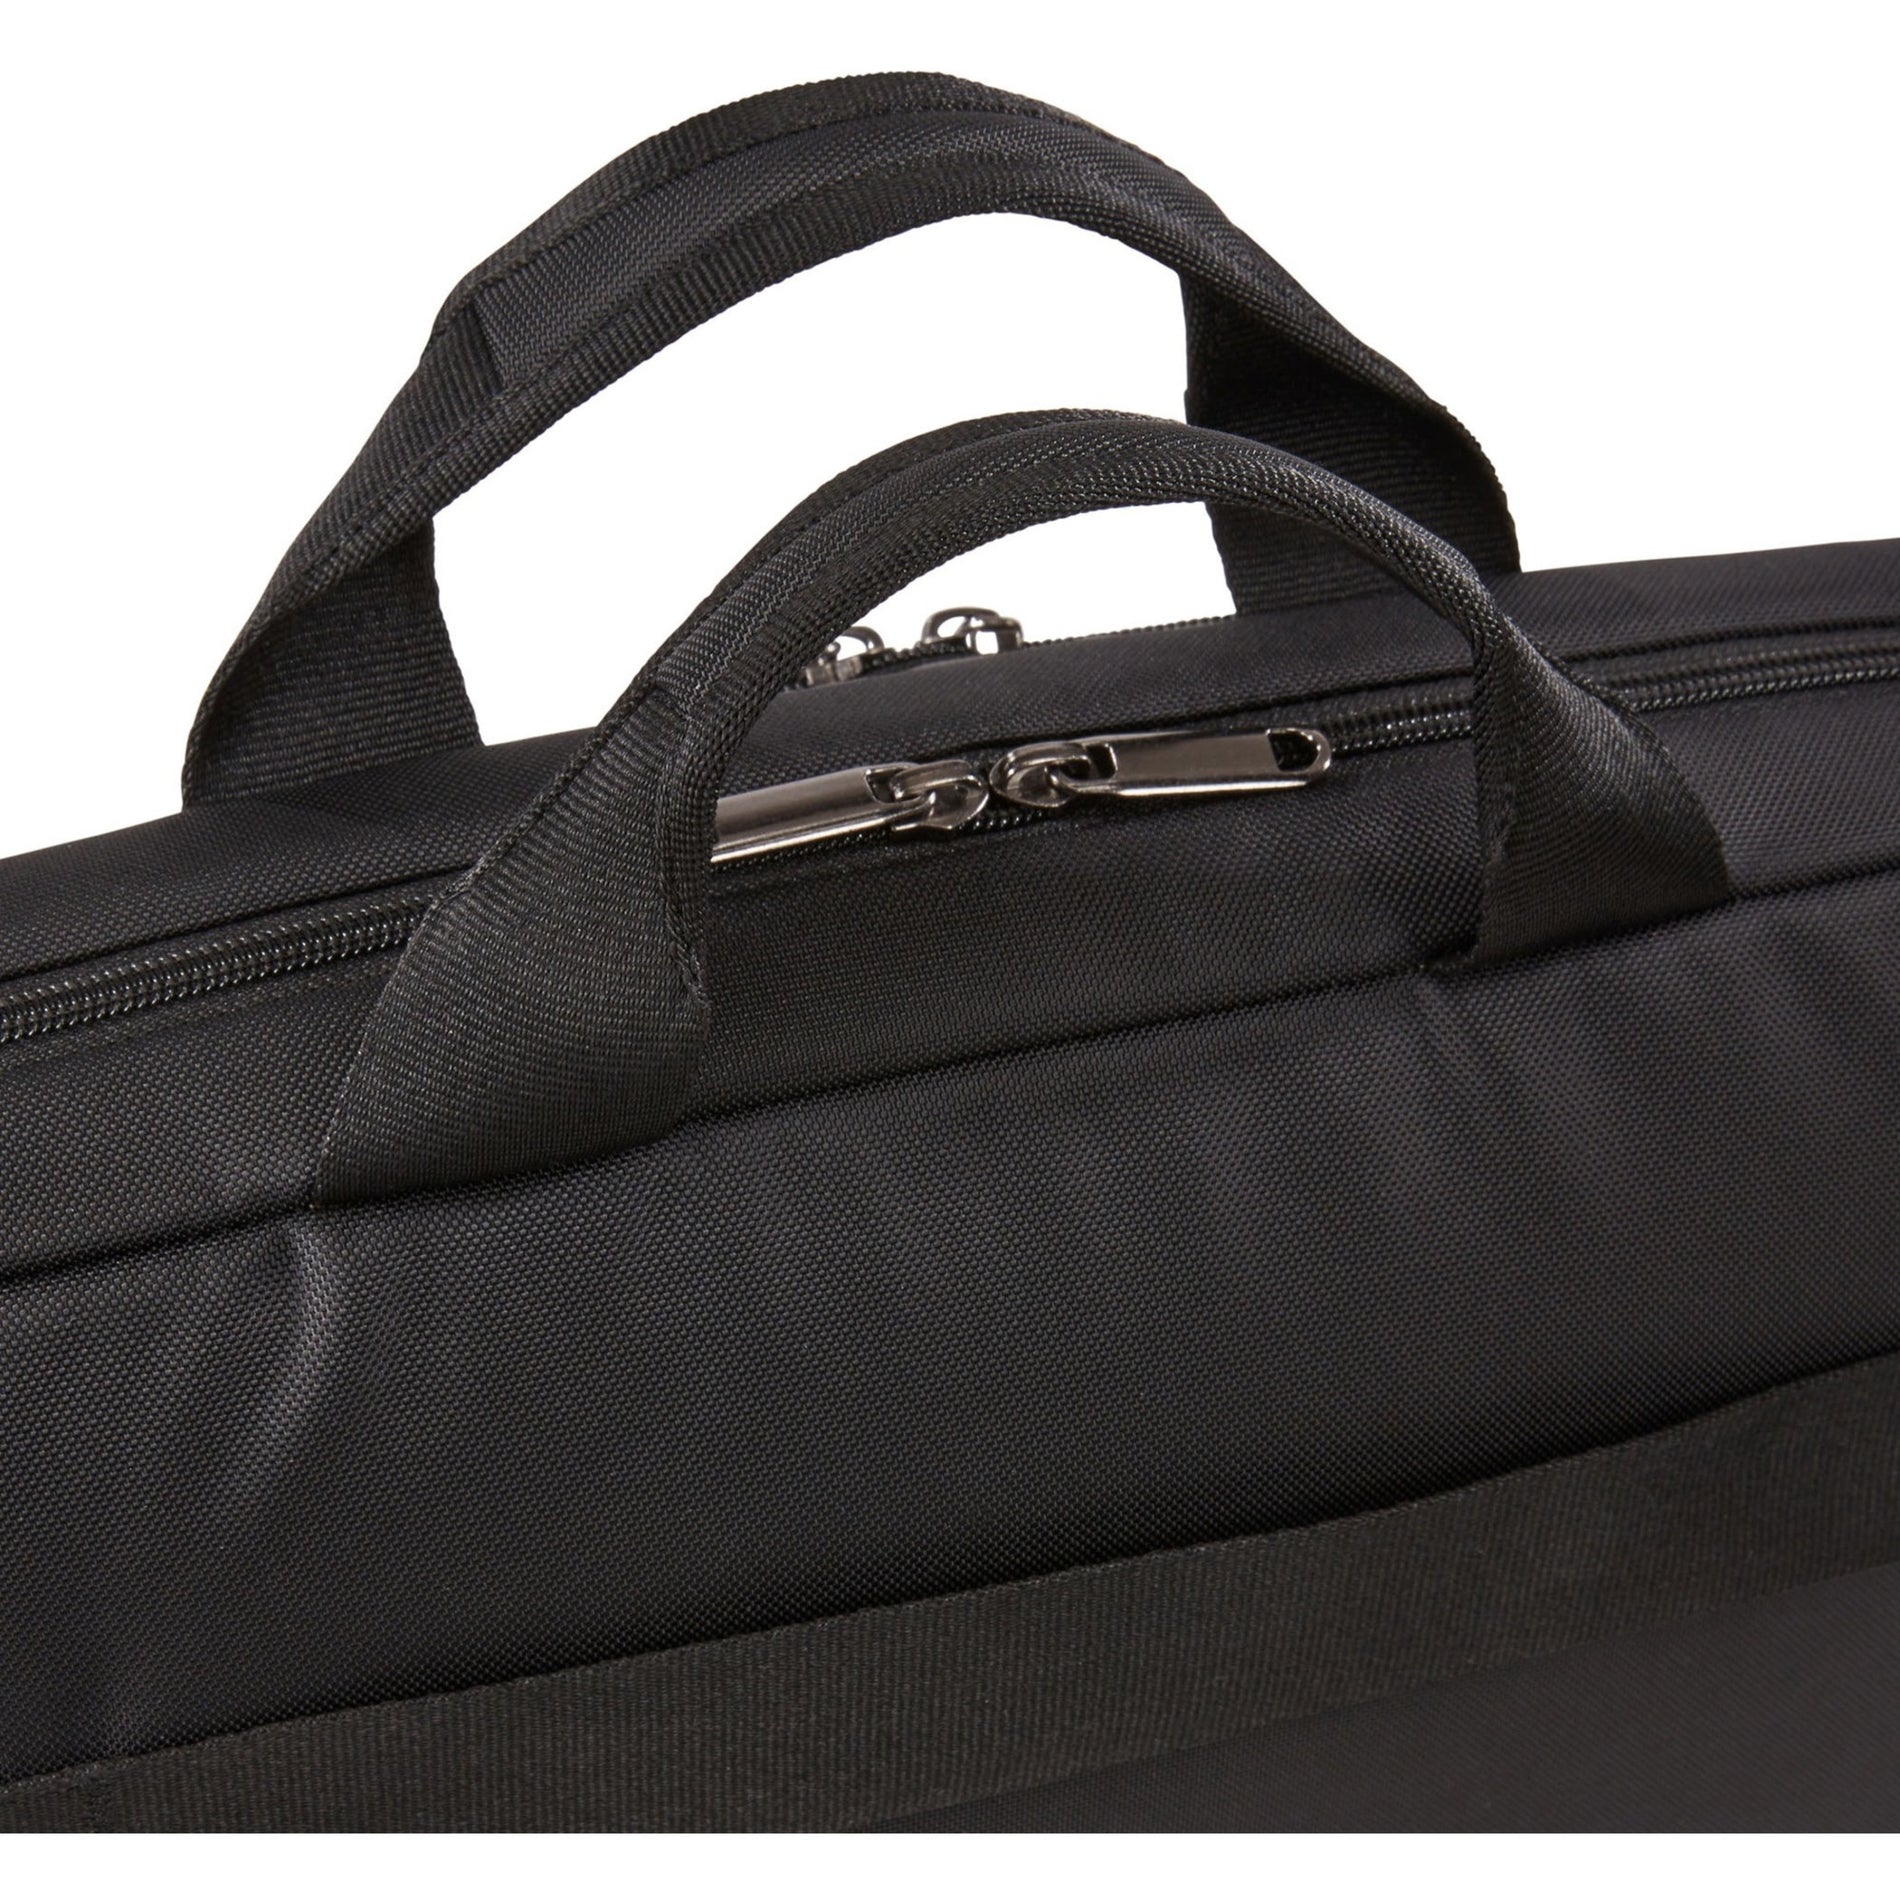 Case Logic 3204527 PROPEL ATT 15.6IN BLACK, Travel/Luggage Case with Laptop and Tablet Compartment